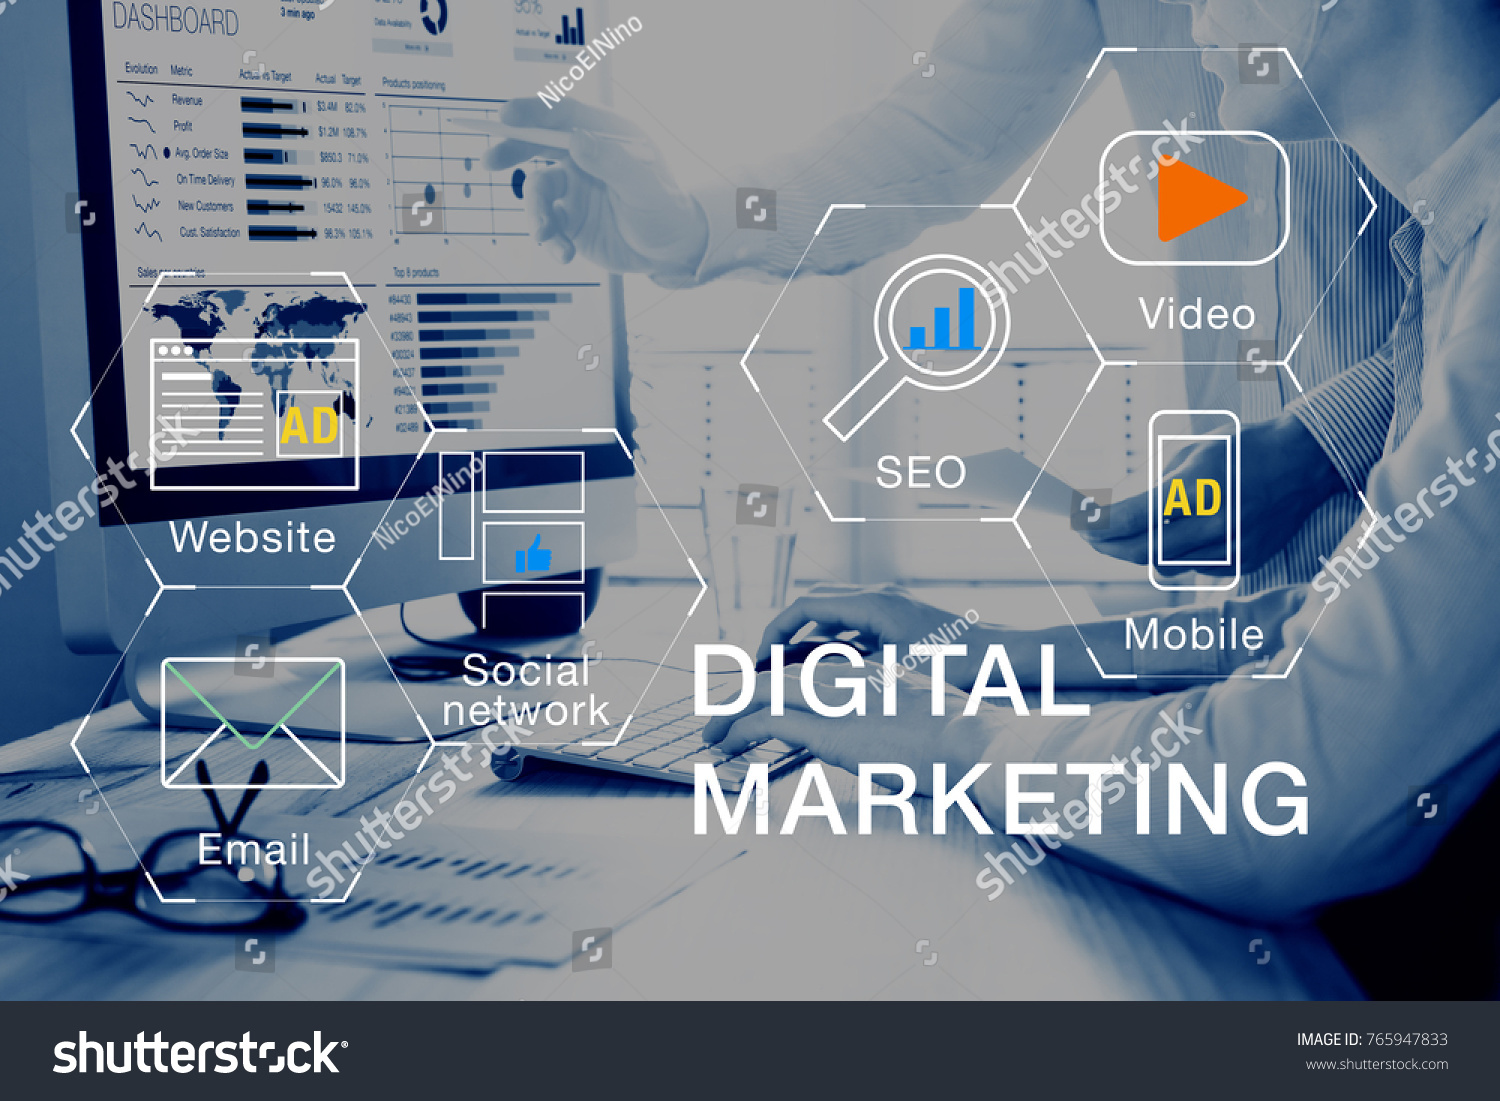 Concept of digital marketing media (website ad, email, social network, SEO, video, mobile app) with icon, and team analyzing return on investment (ROI) and Pay Per Click (PPC) dashboard in background #765947833